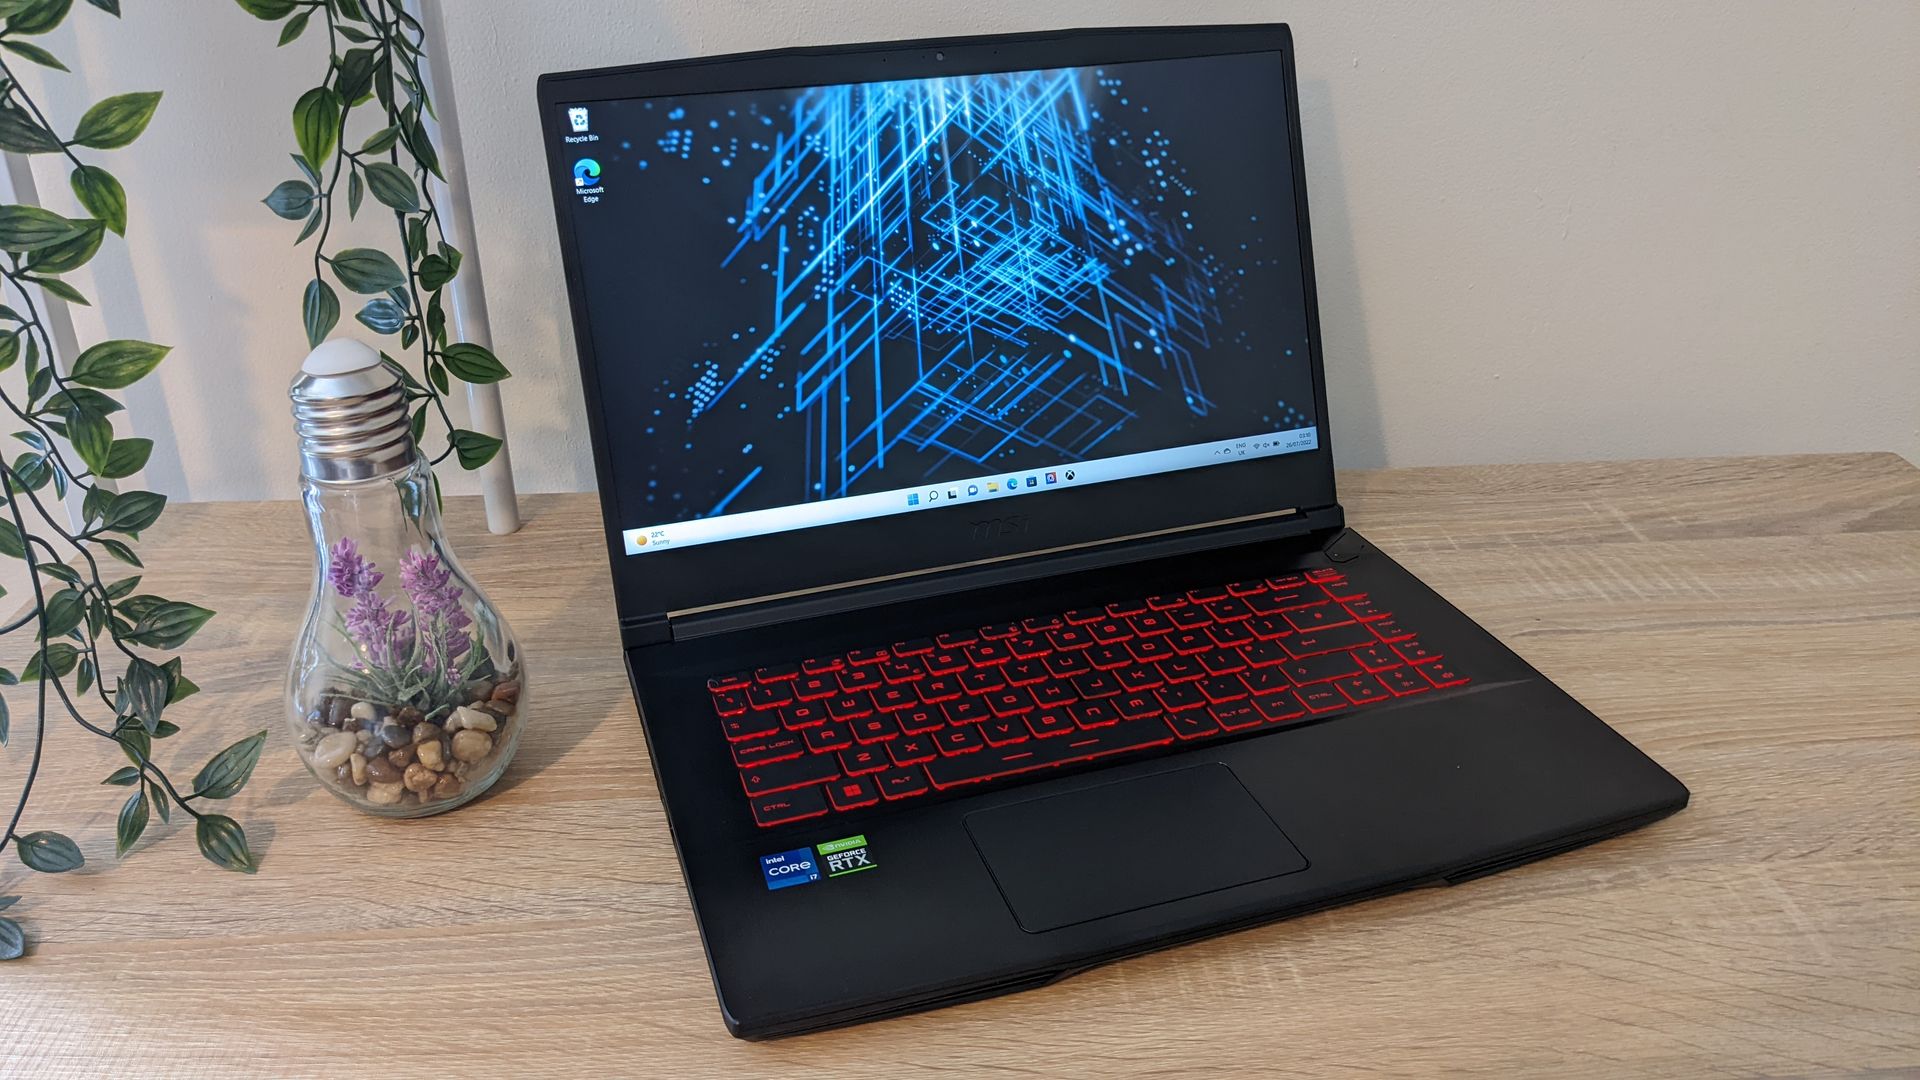 This 599 MSI gaming laptop is the perfect budget AutoCAD 2024 notebook